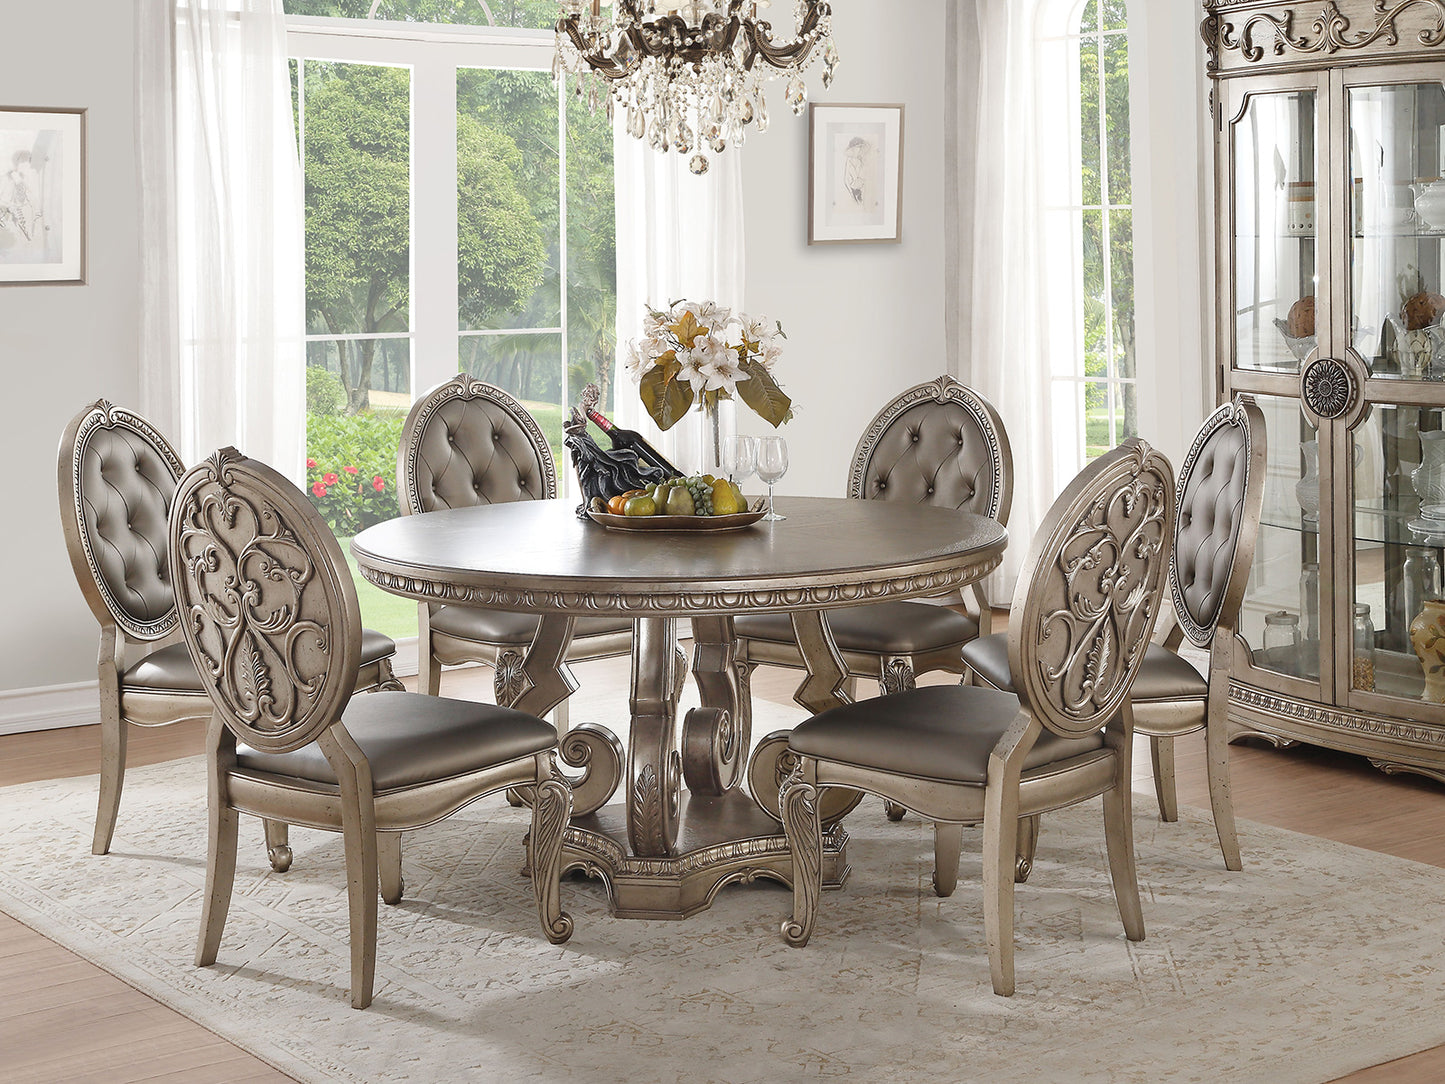 WALBROOK - Traditional Antique Silver Finish 7 pieces Dining Room Set